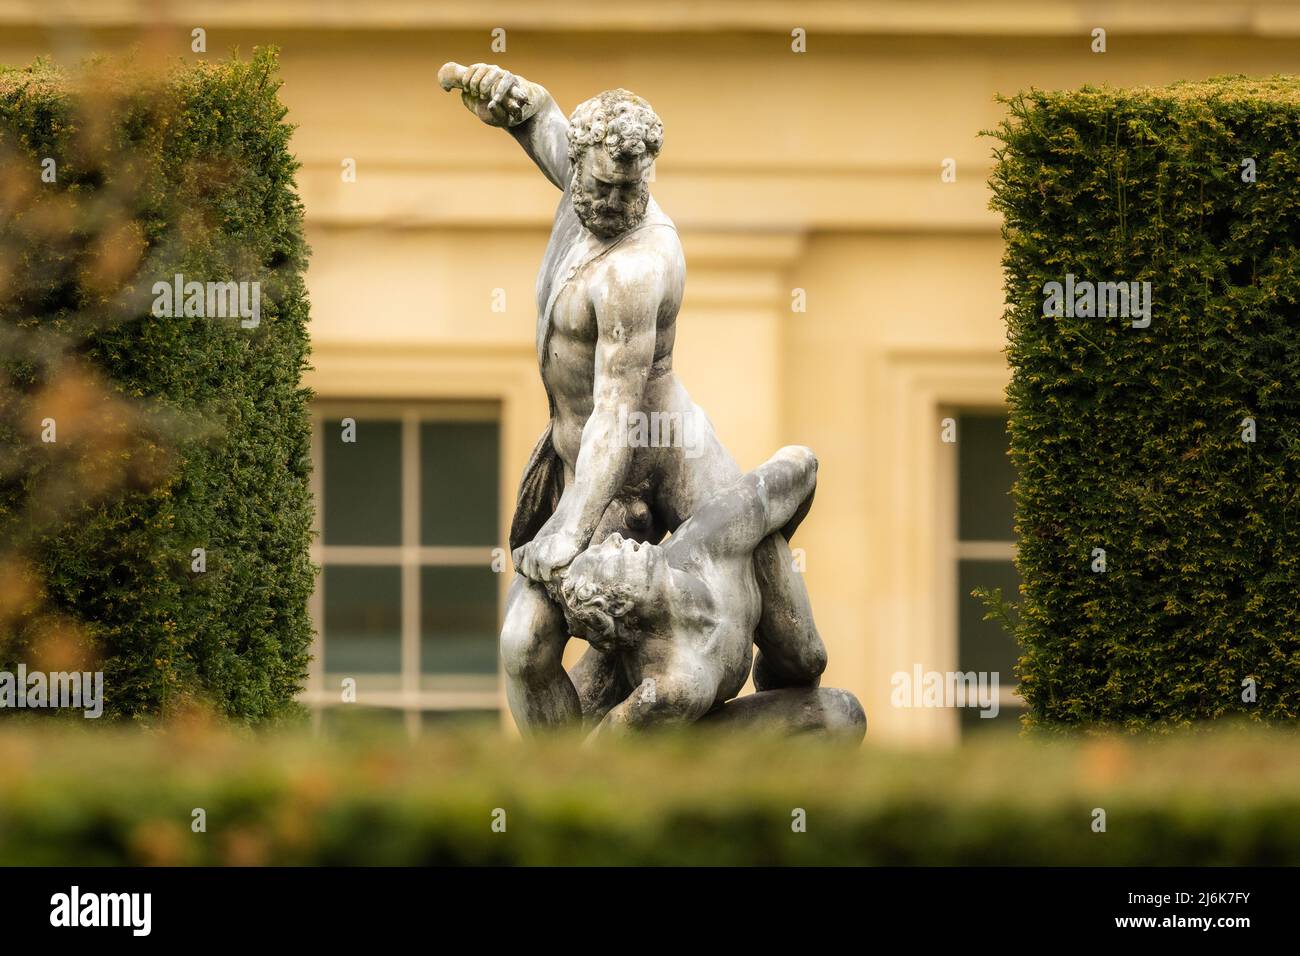 Samson Slaying a Philistine, stone statue in the gardens at Chatsworth House, Derbyshire, UK Stock Photo